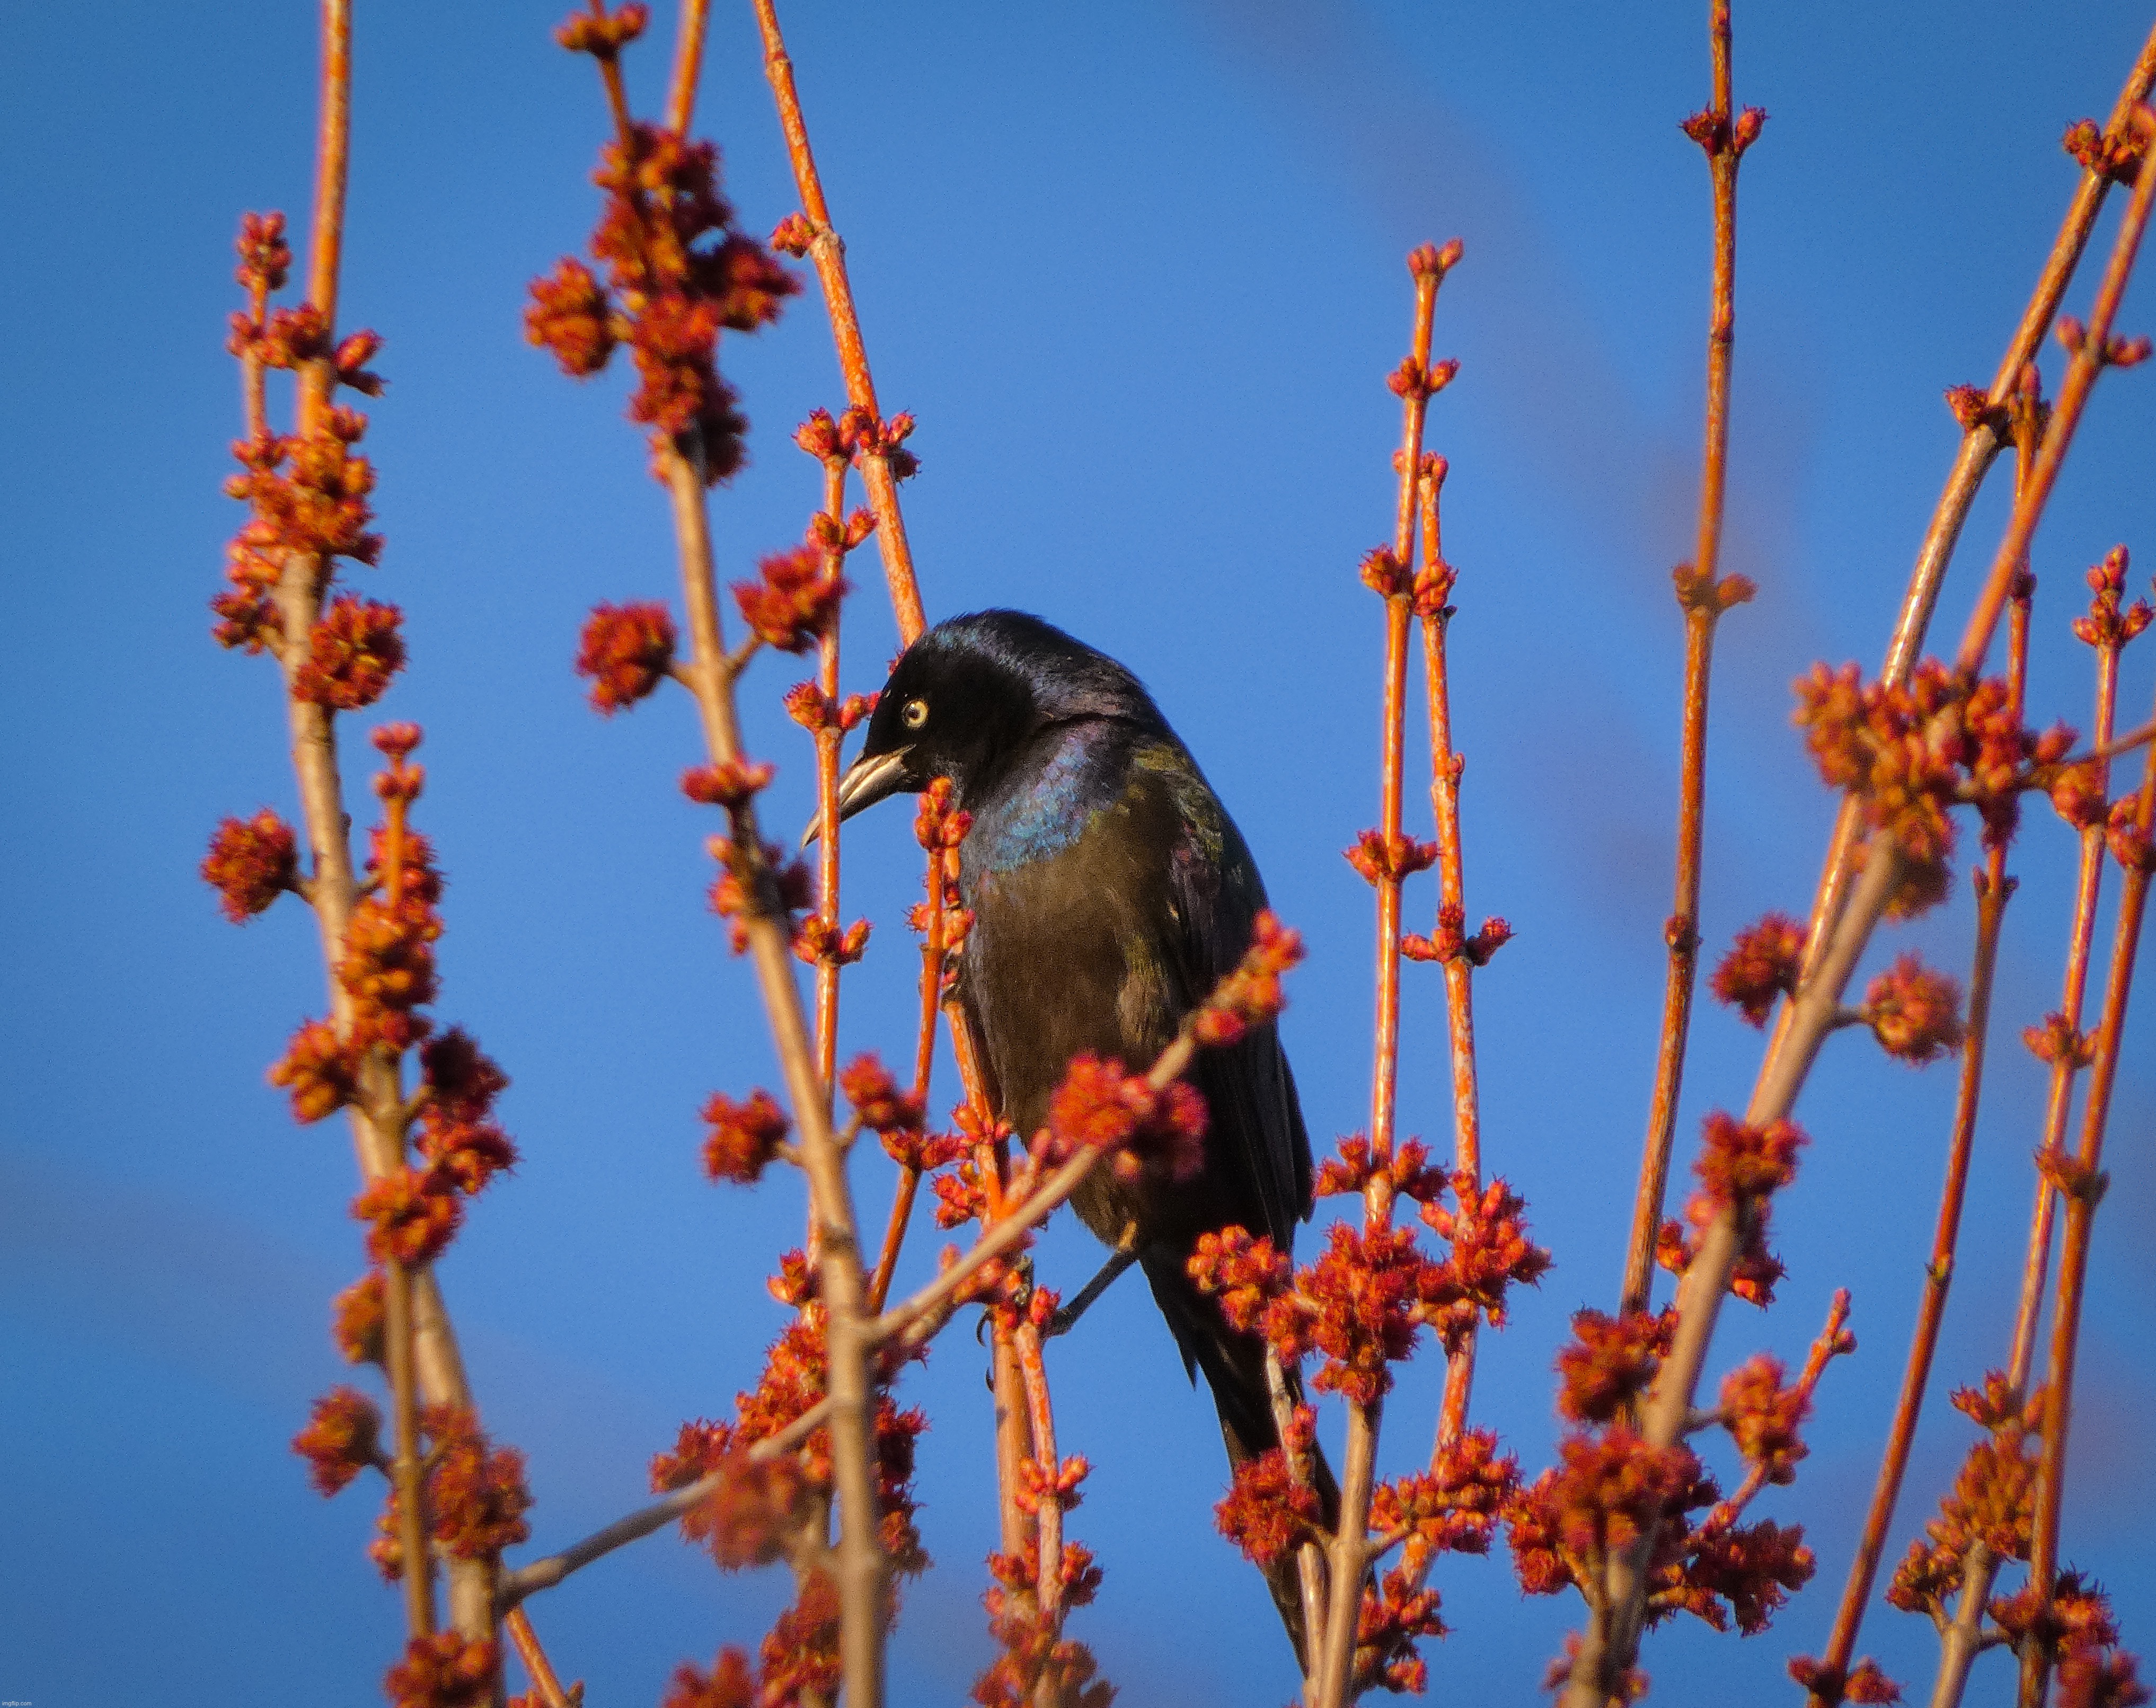 A picture of a grackle high up in a tree that I took | image tagged in share your own photos | made w/ Imgflip meme maker